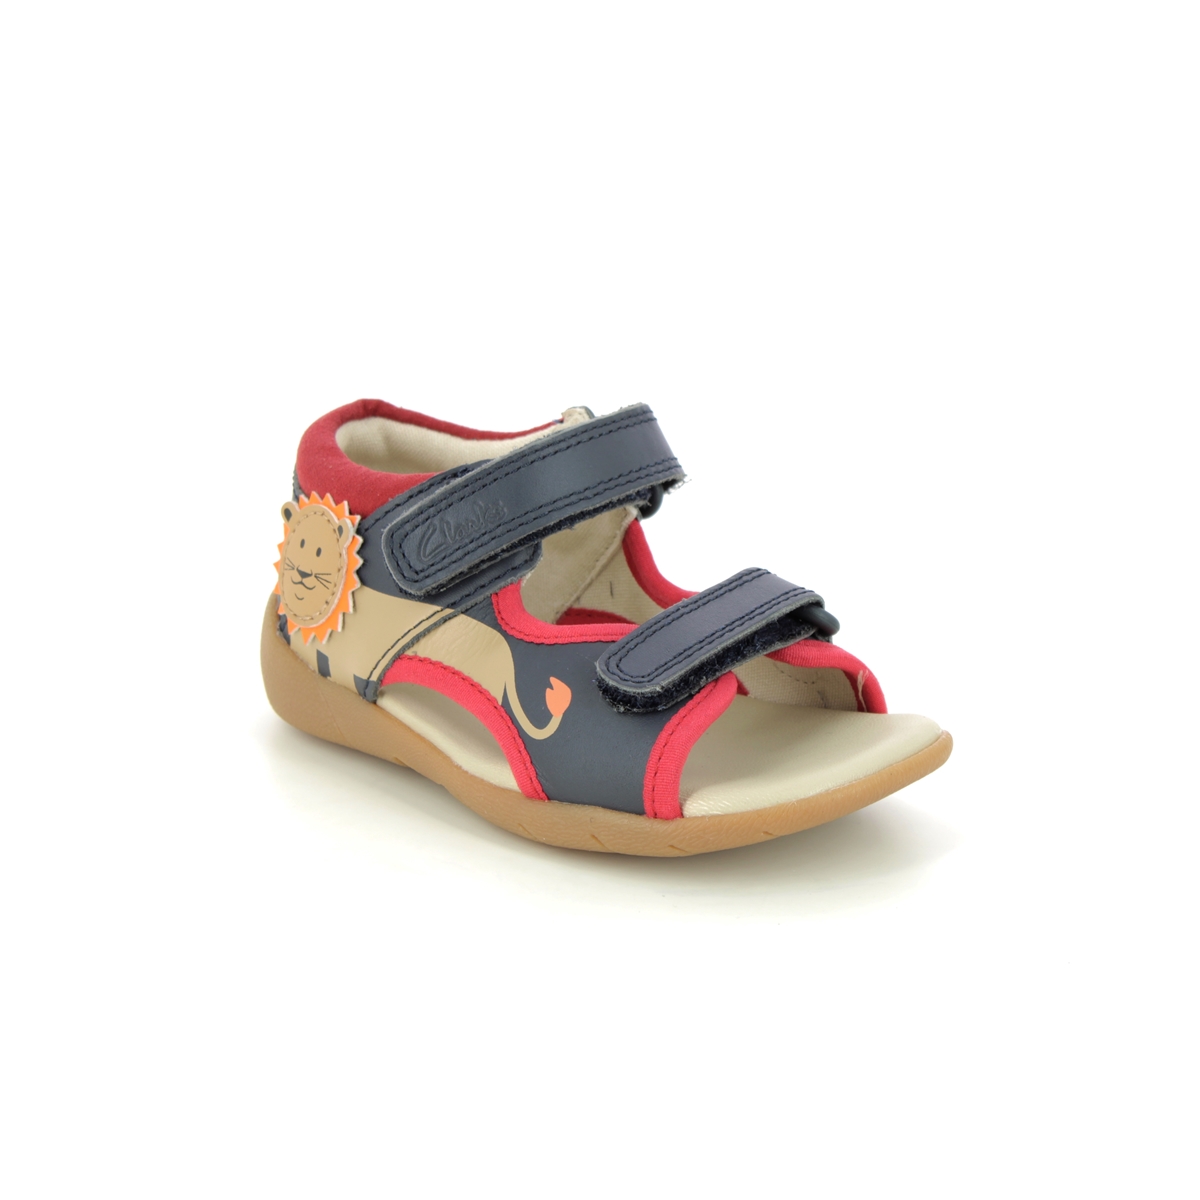 Clarks Zora Jungle T Navy Leather Kids Boys Sandals 646216F In Size 6.5 In Plain Navy Leather F Width Fitting Regular Fit For kids